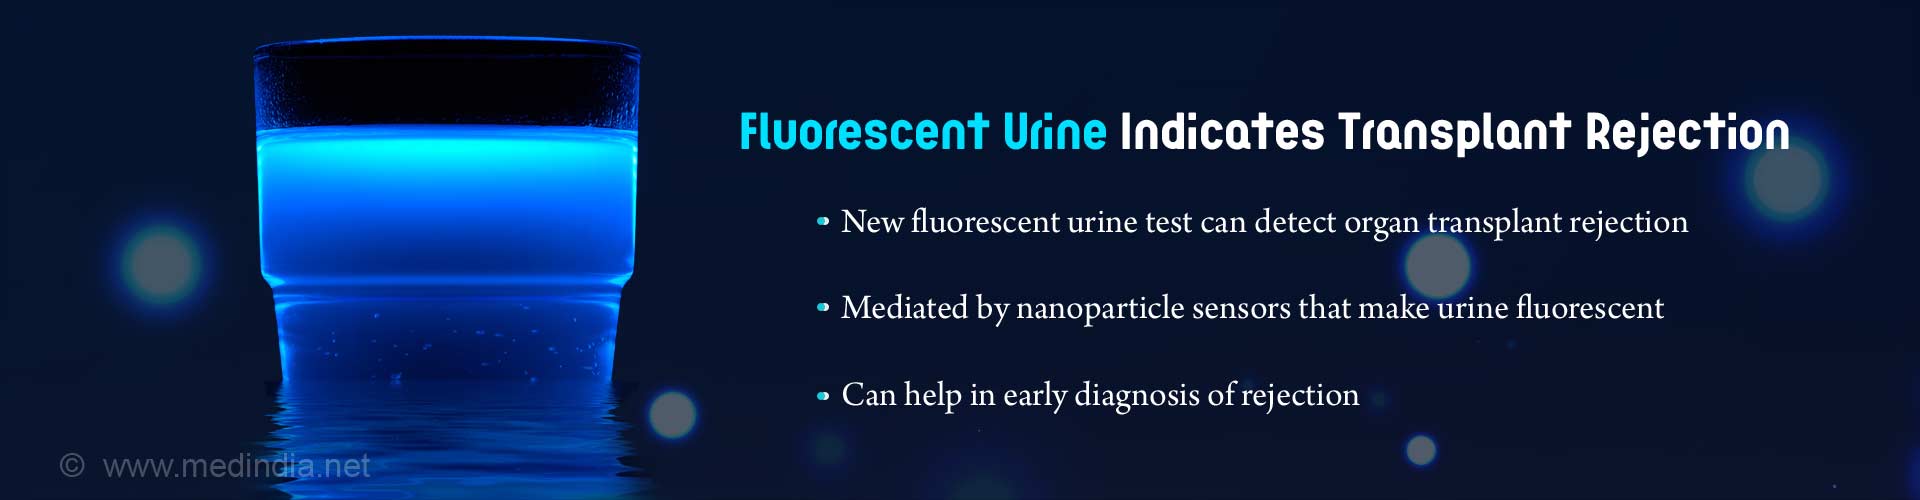 Fluorescent urine indicates transplant rejection. New fluorescent urine test can detect organ transplant rejection. Mediated by nanoparticle sensors that make urine fluorescent. Can help in early diagnosis of rejection.